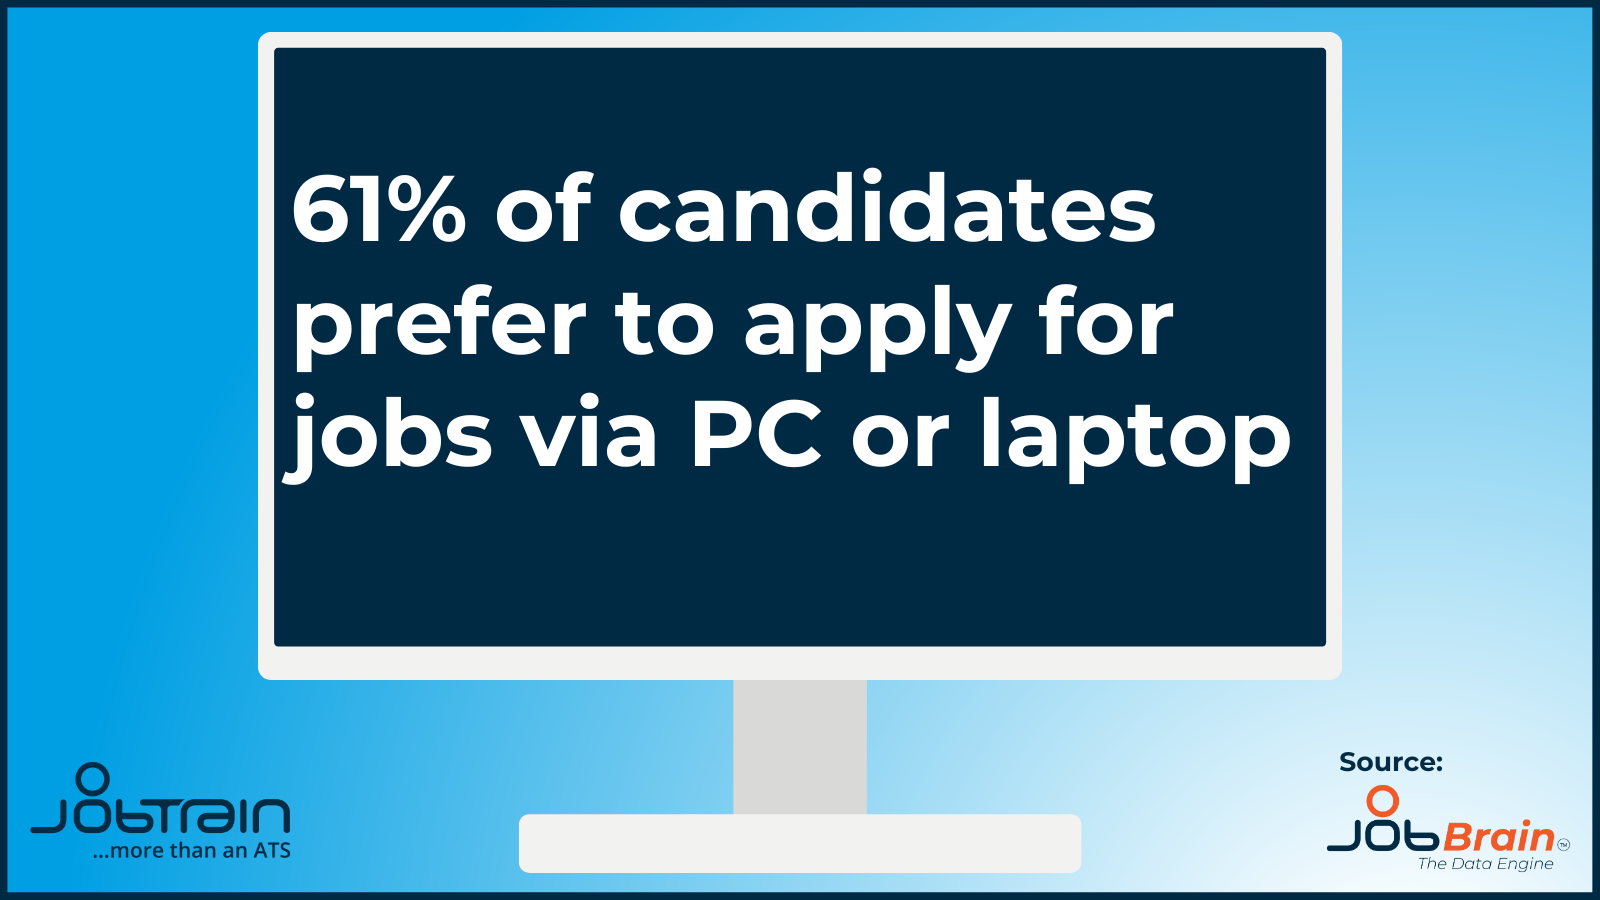 61% of candidates prefer to apply for jobs via PC or laptop